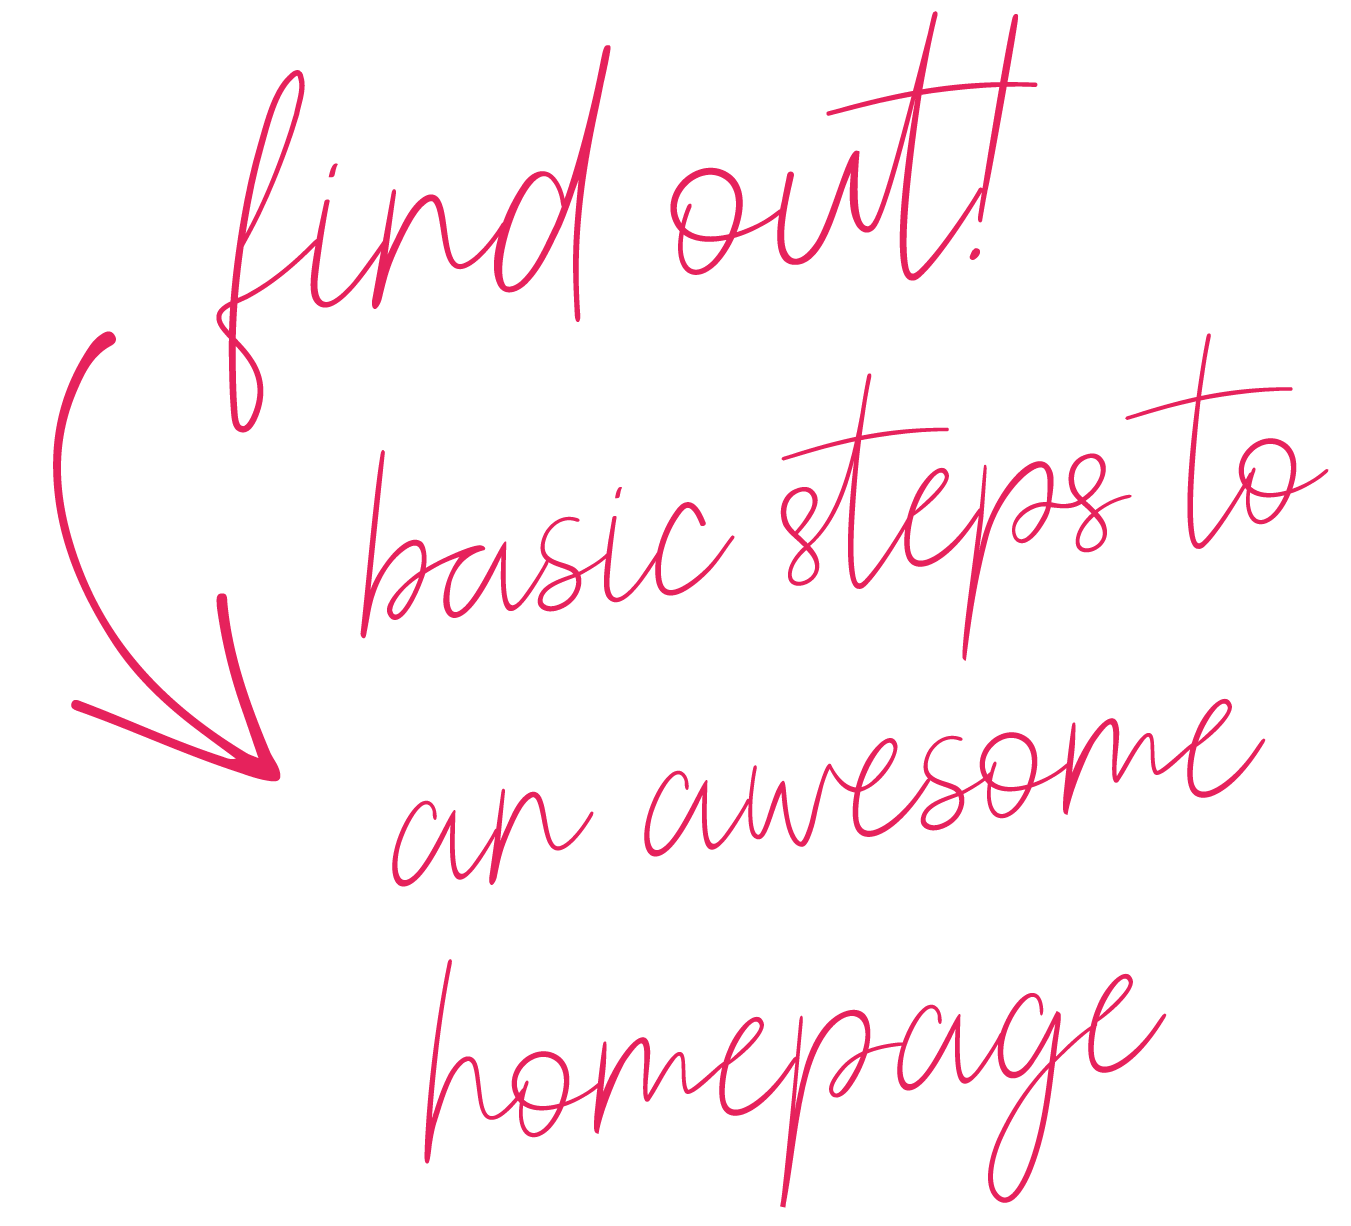 Basic Steps to an awesome homepage